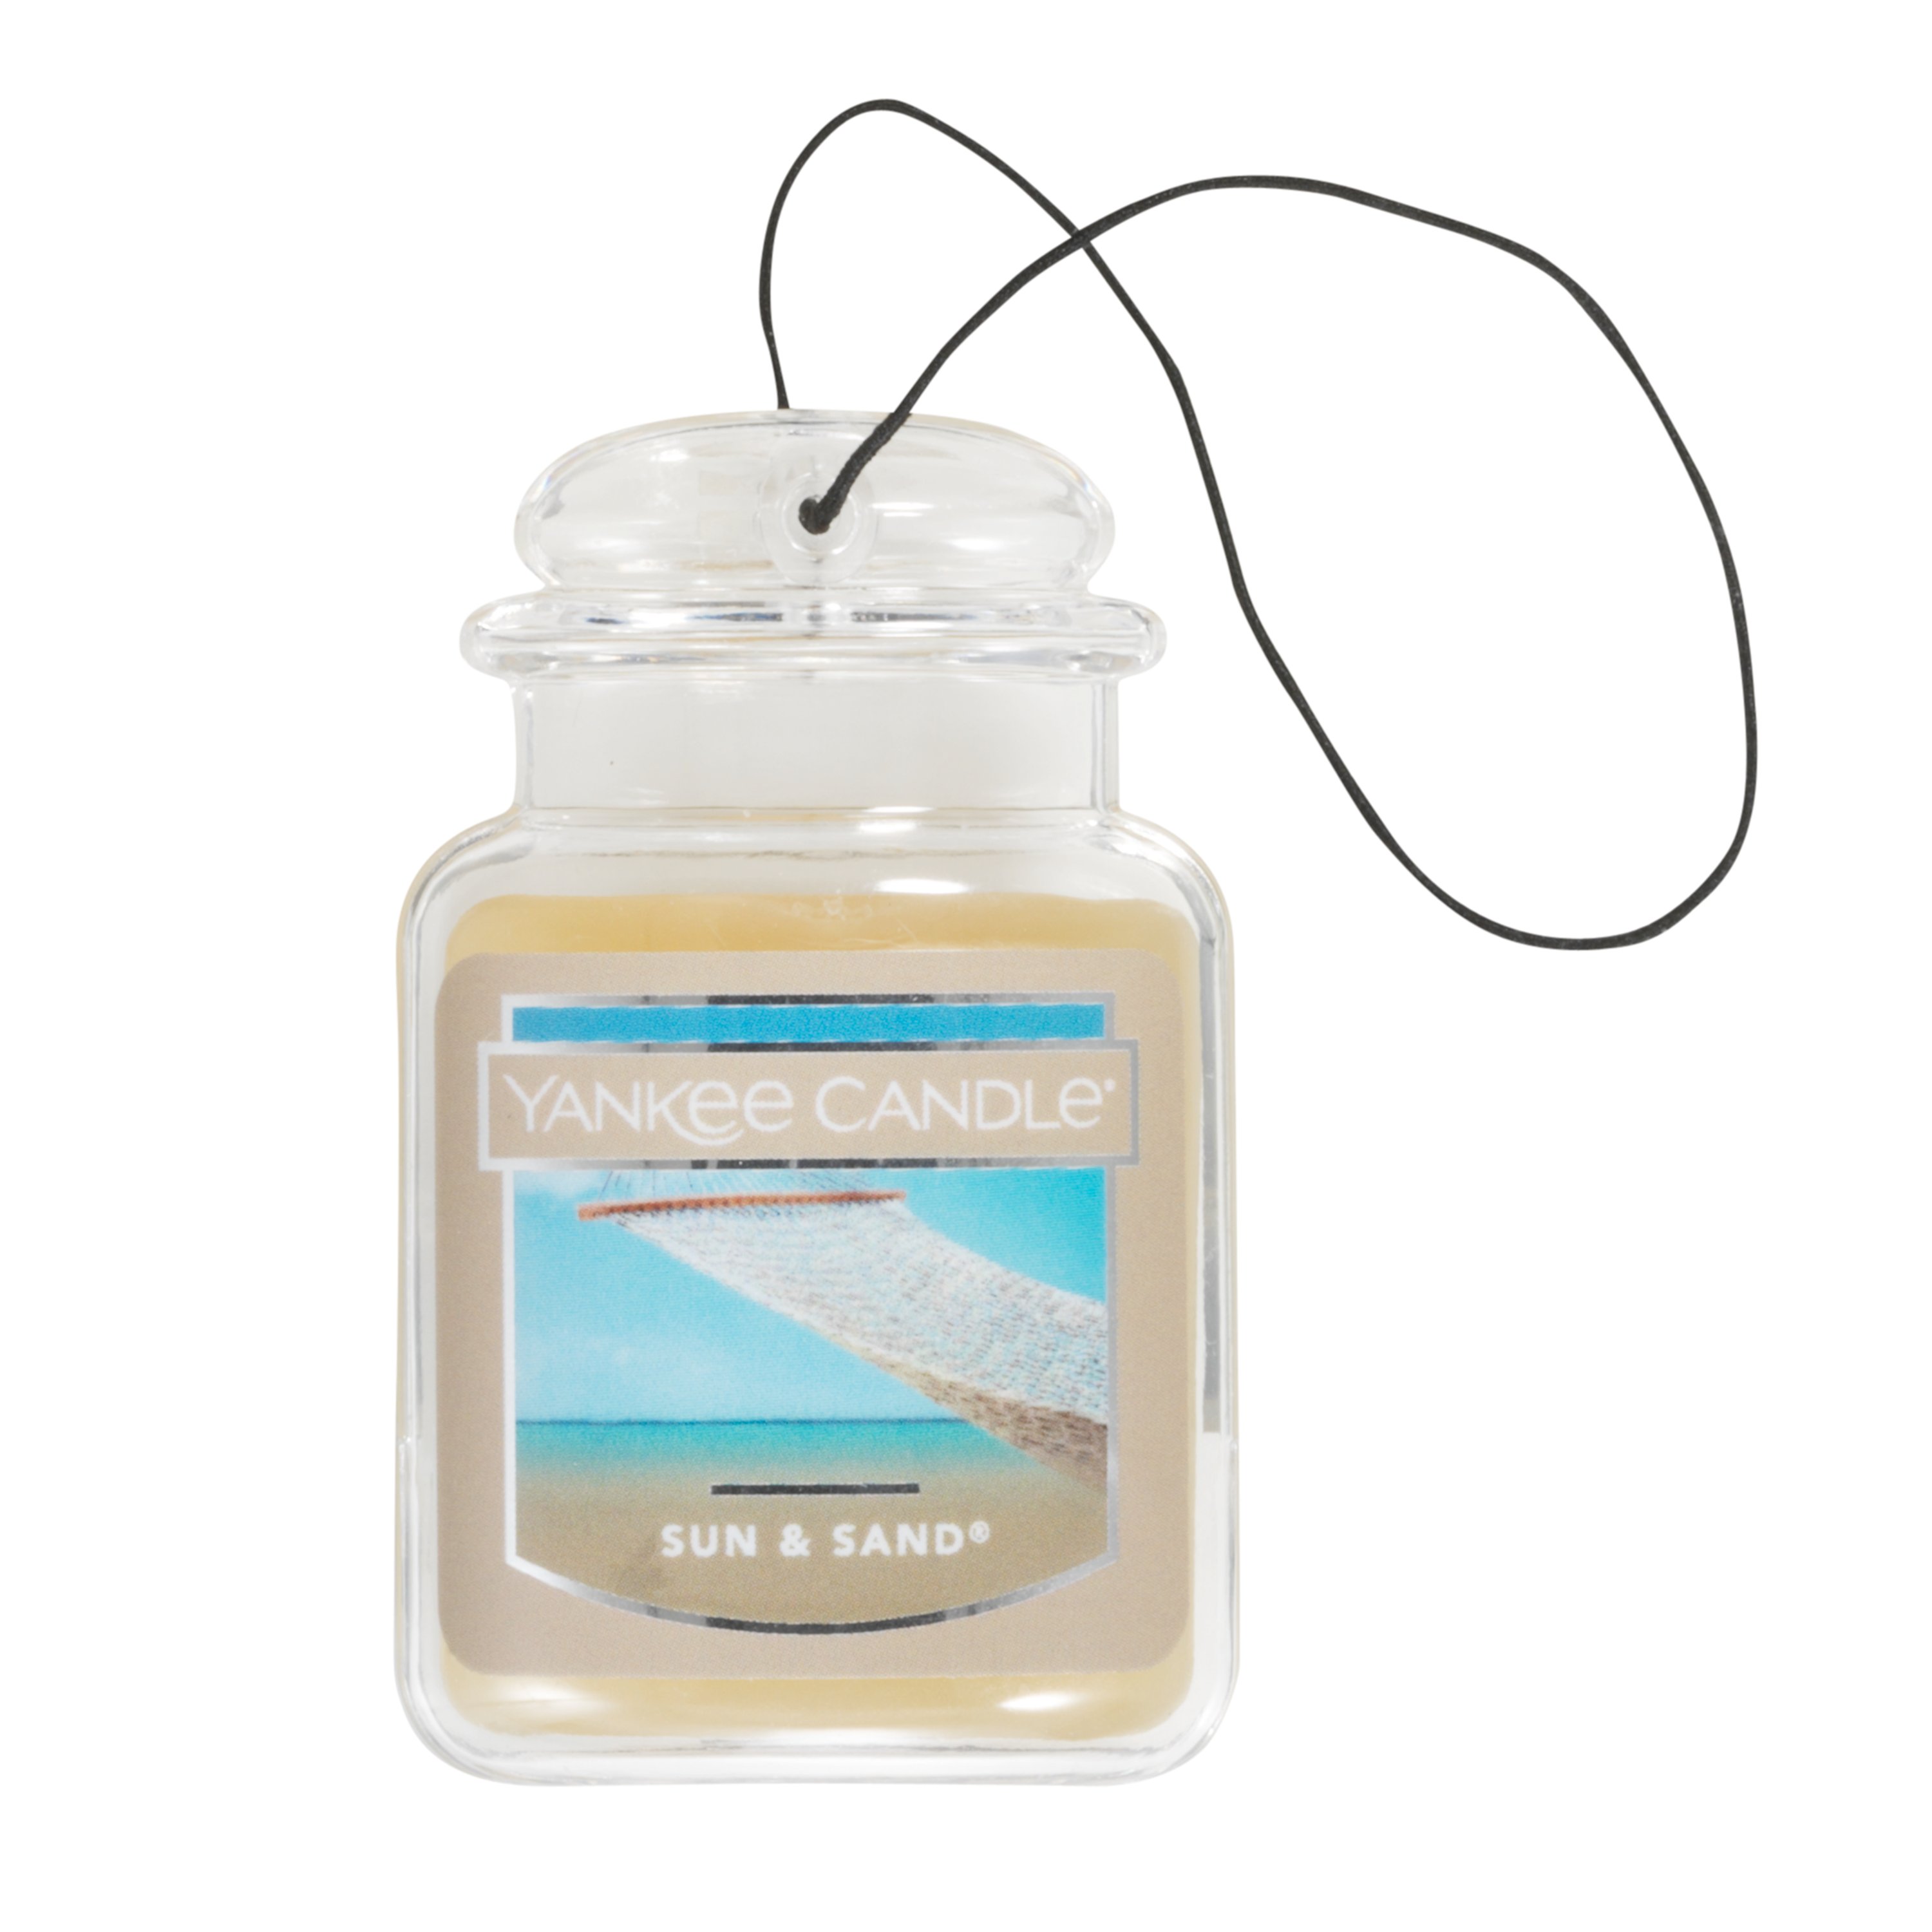 Yankee candle car jar  best car scent for summer? 